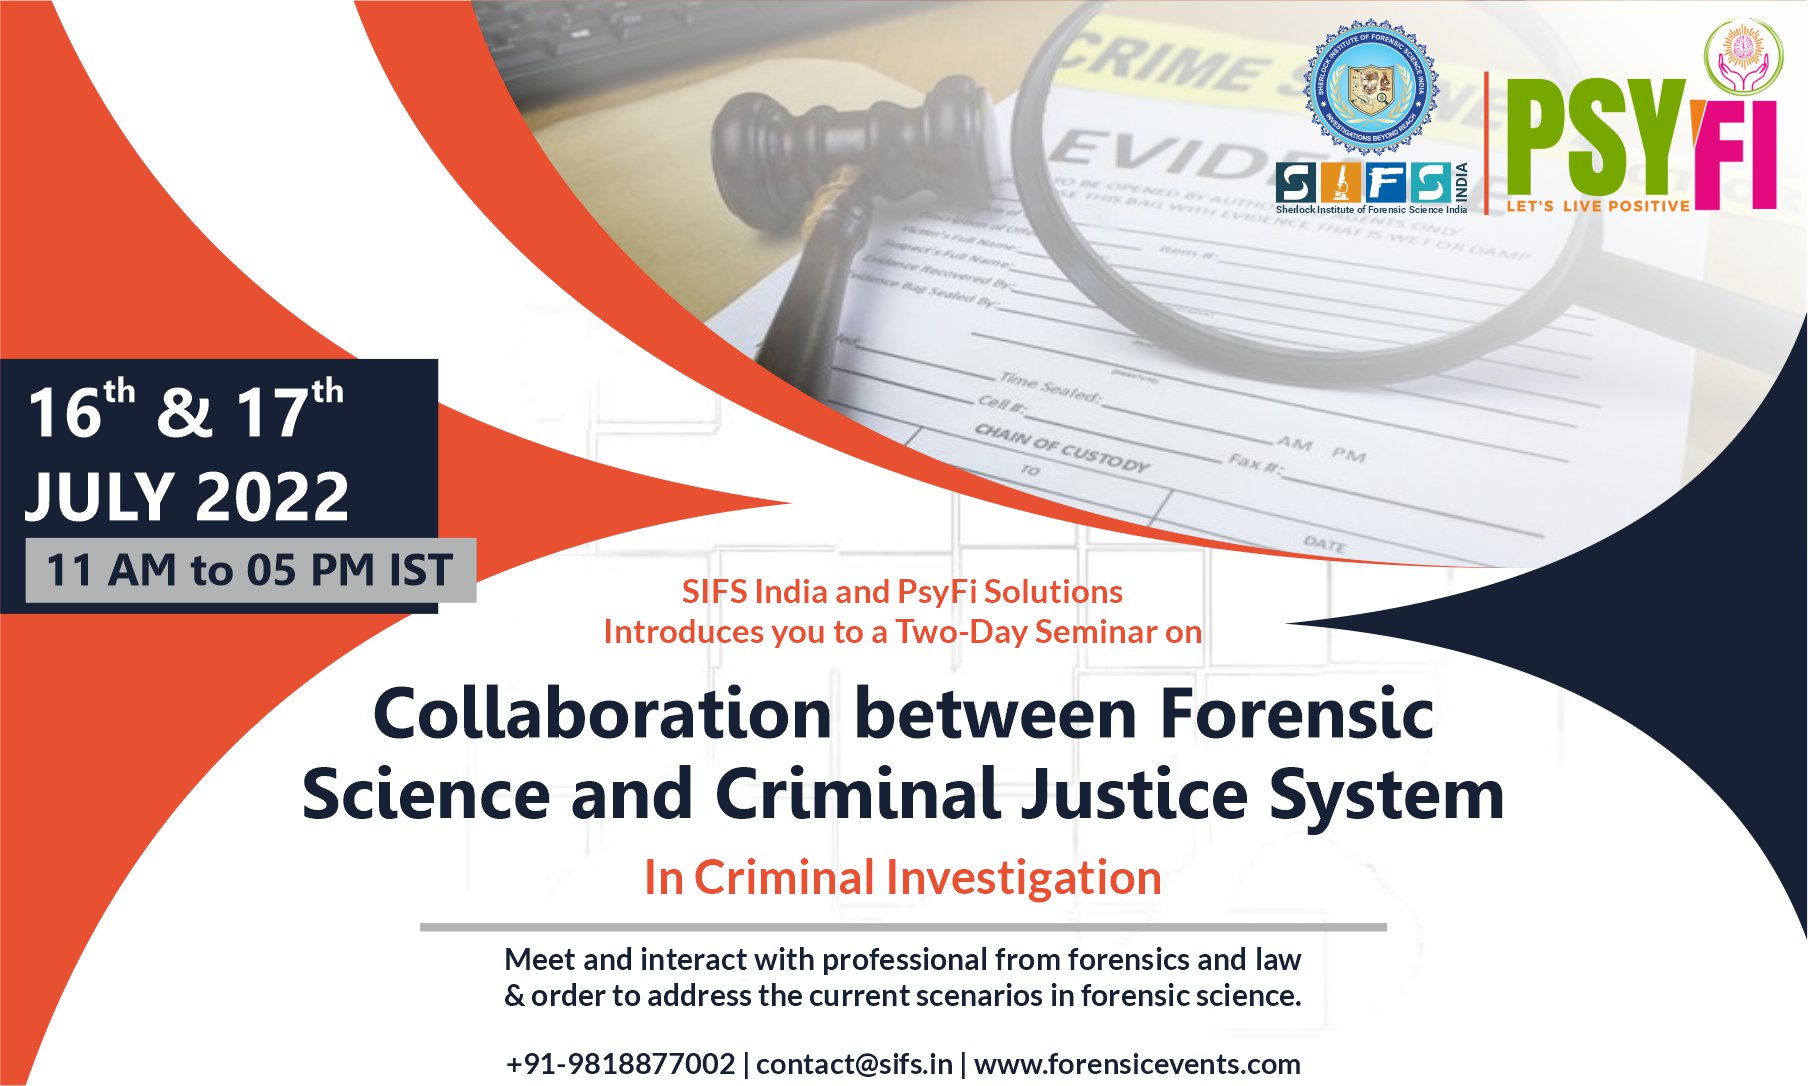 Collaboration between Forensic Science and Criminal Justice System in Criminal Investigation